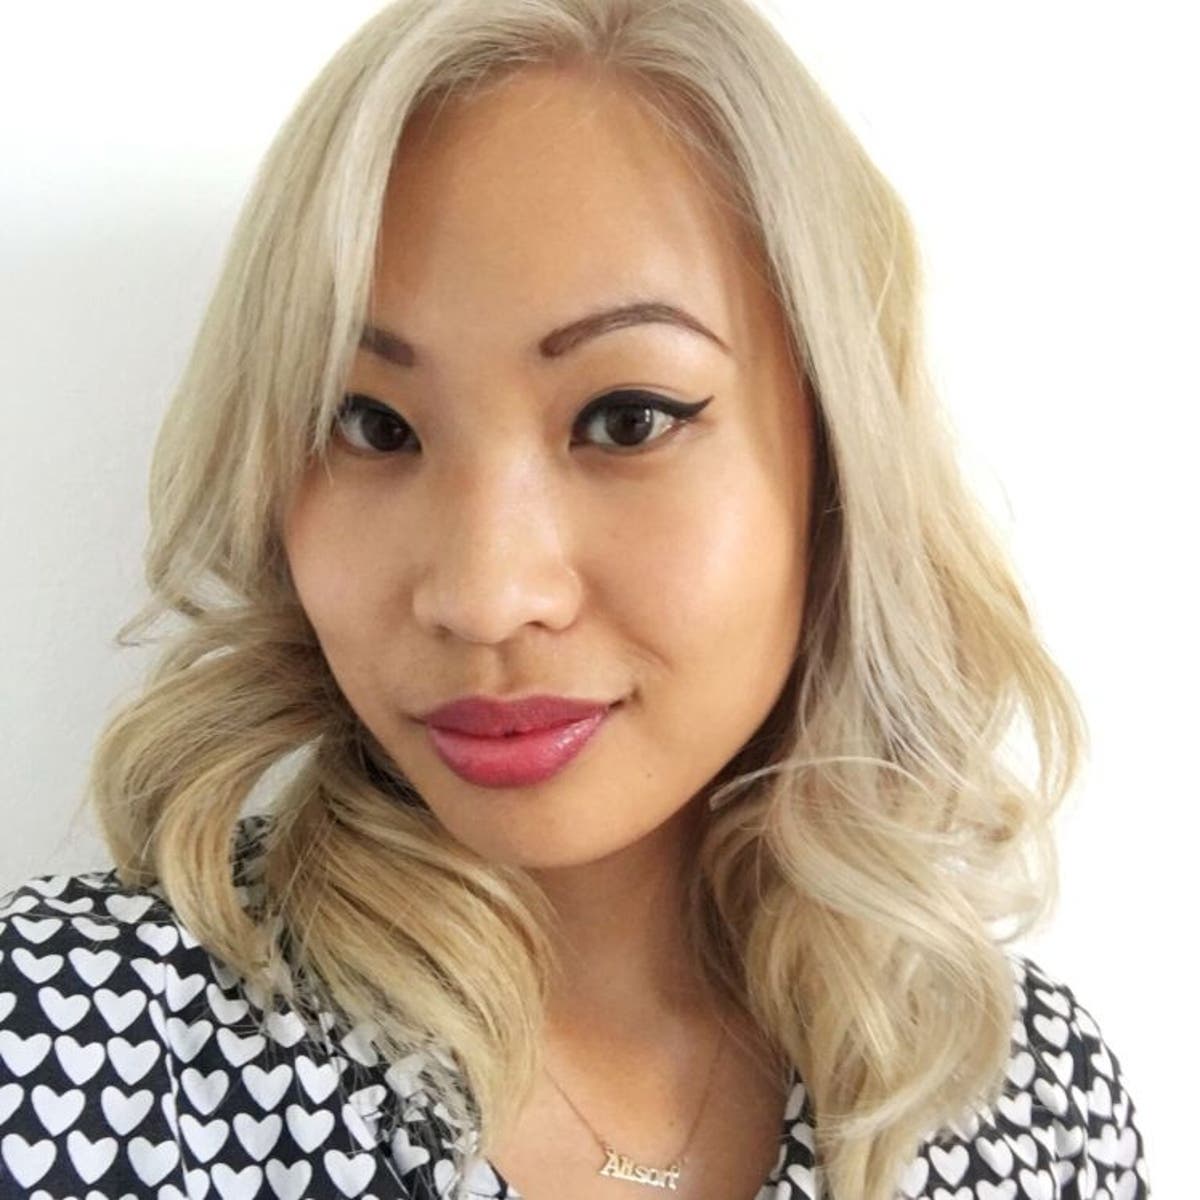 How To Dye Your Asian Hair Blonde The Only Guide You Ll Need